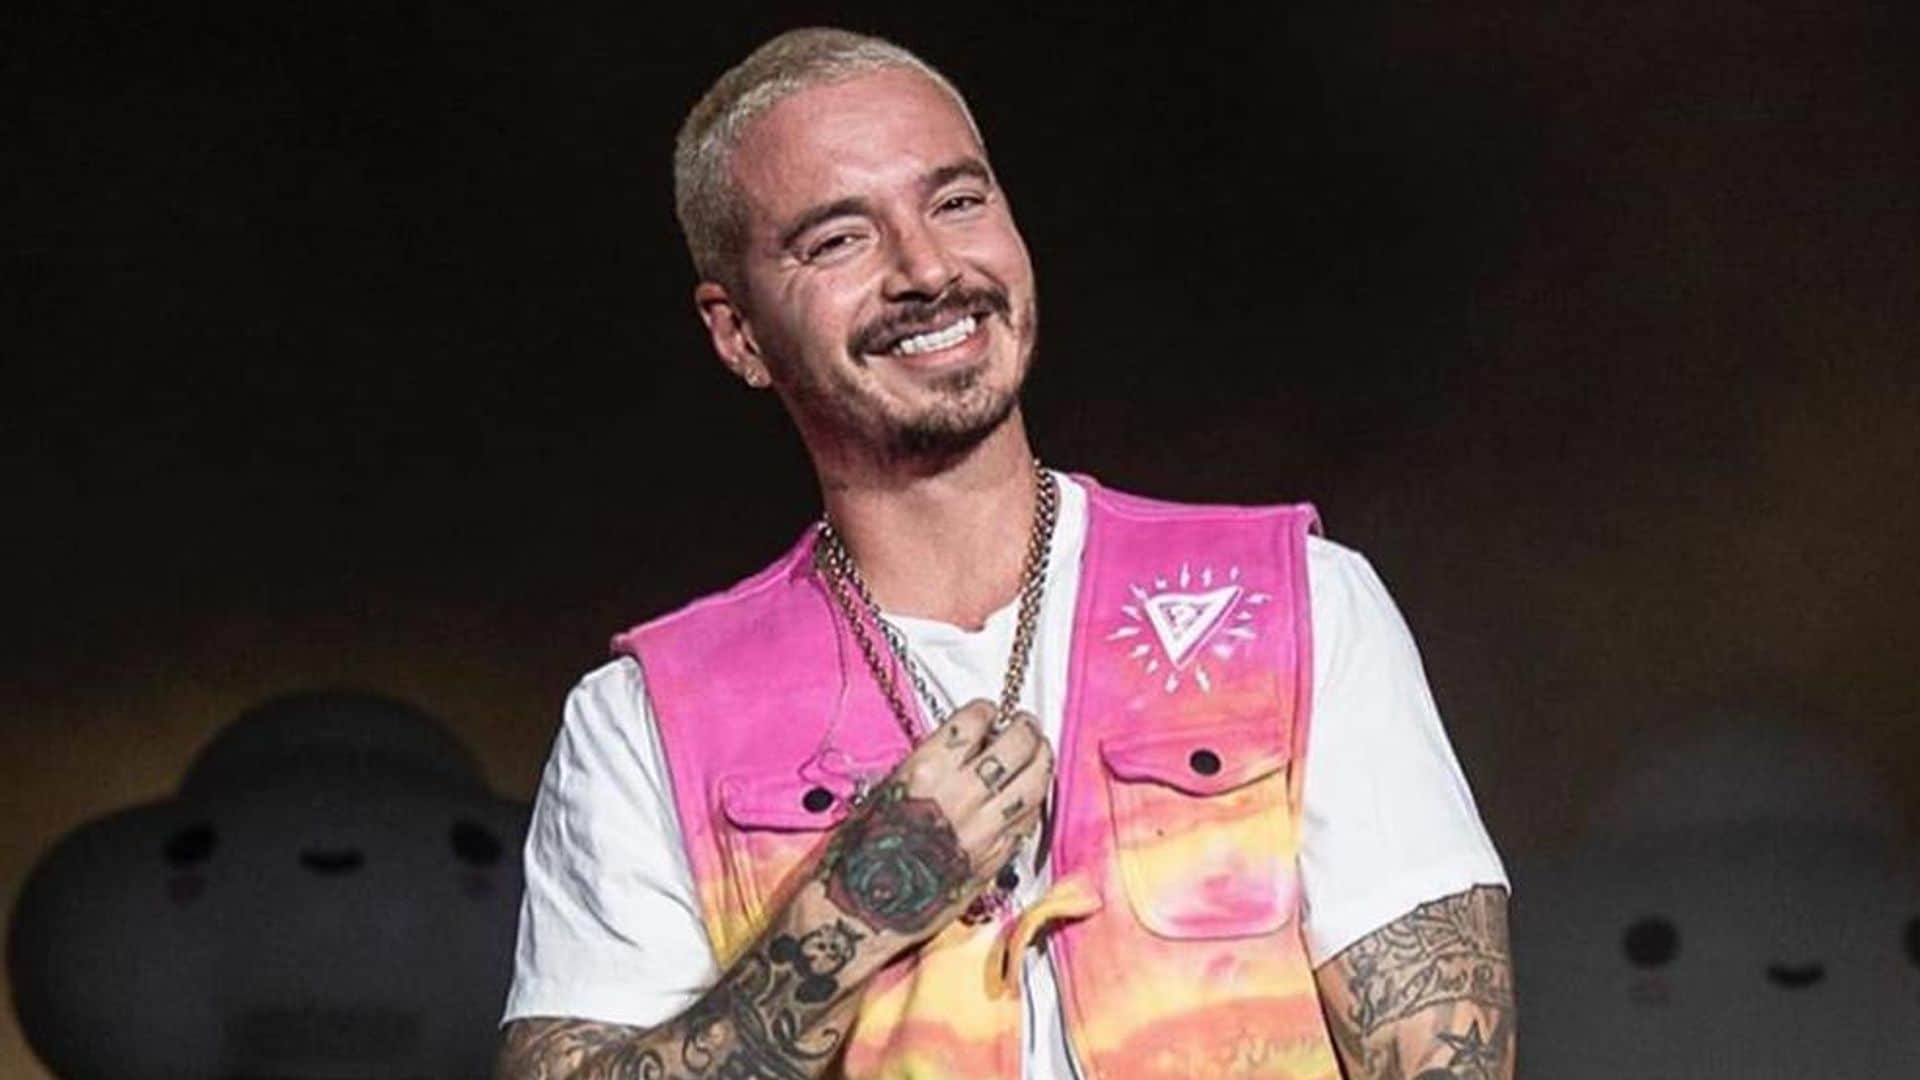 See how J Balvin reacted to a man who confused him for fellow Colombiano Maluma